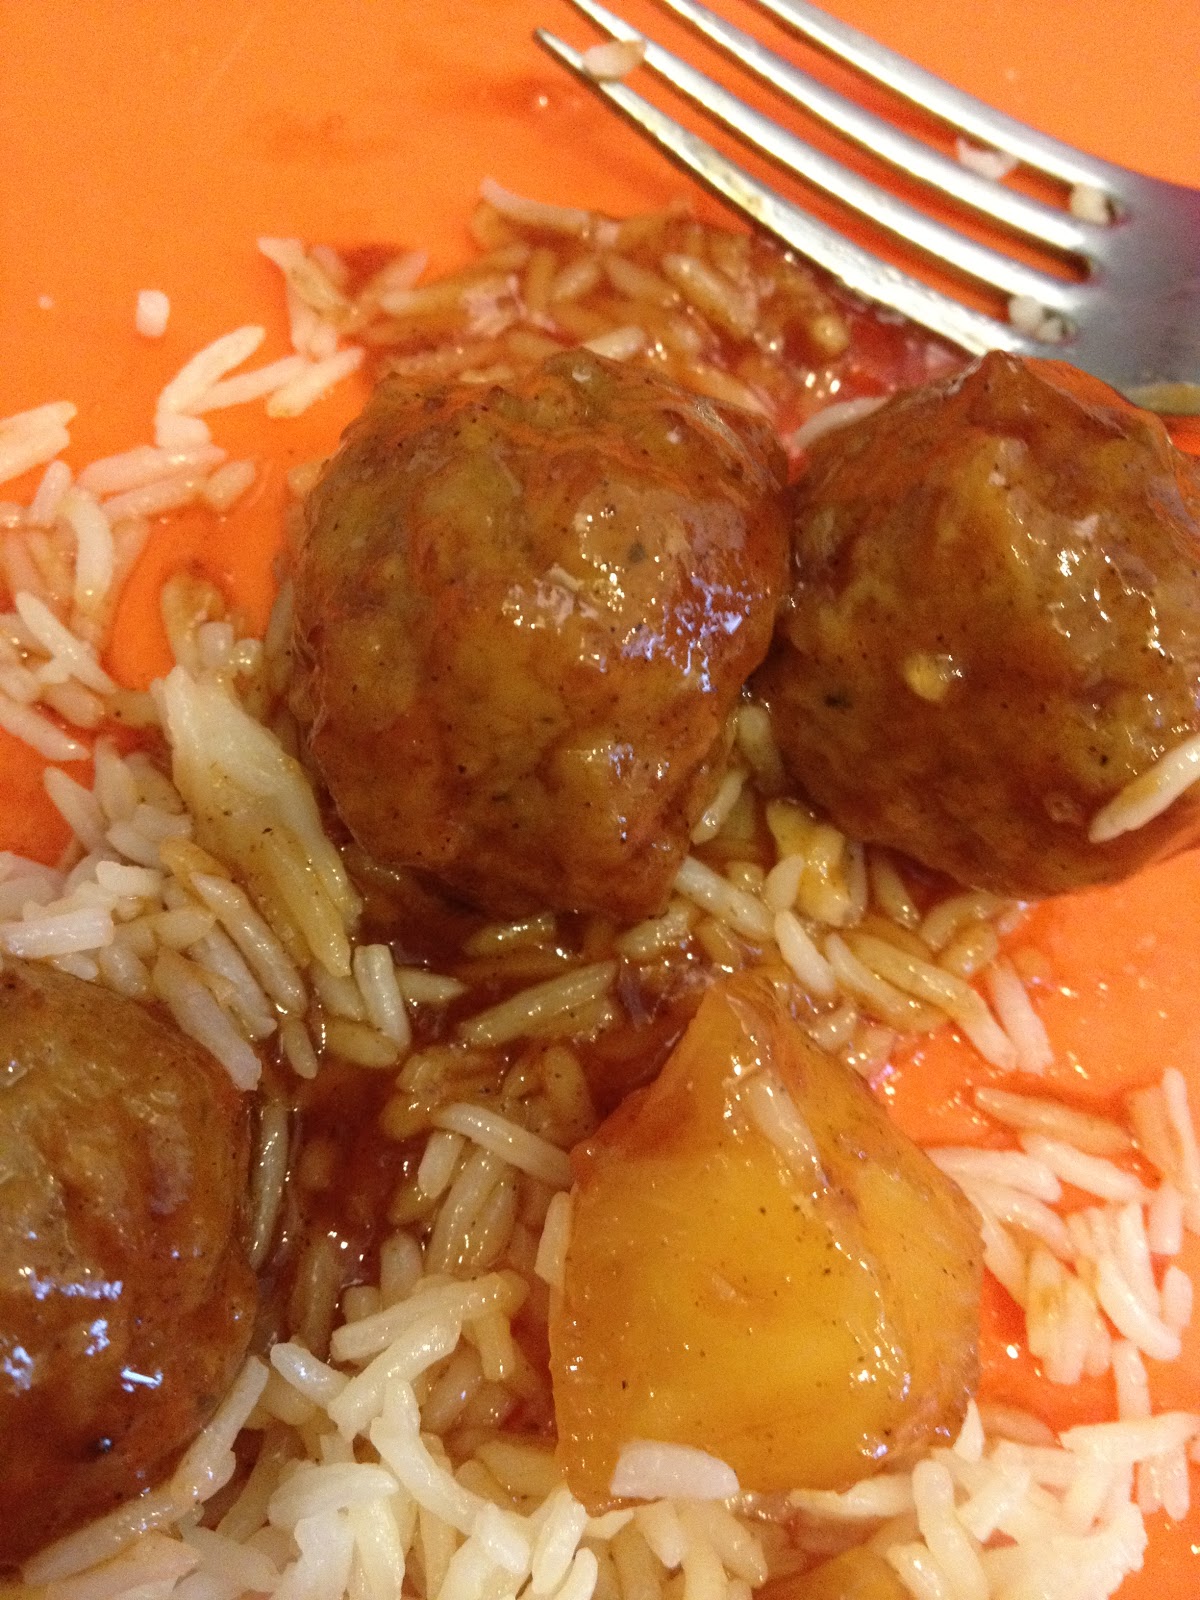 My Casual Kitchen: Slow Cooker Maple Glazed Meatballs